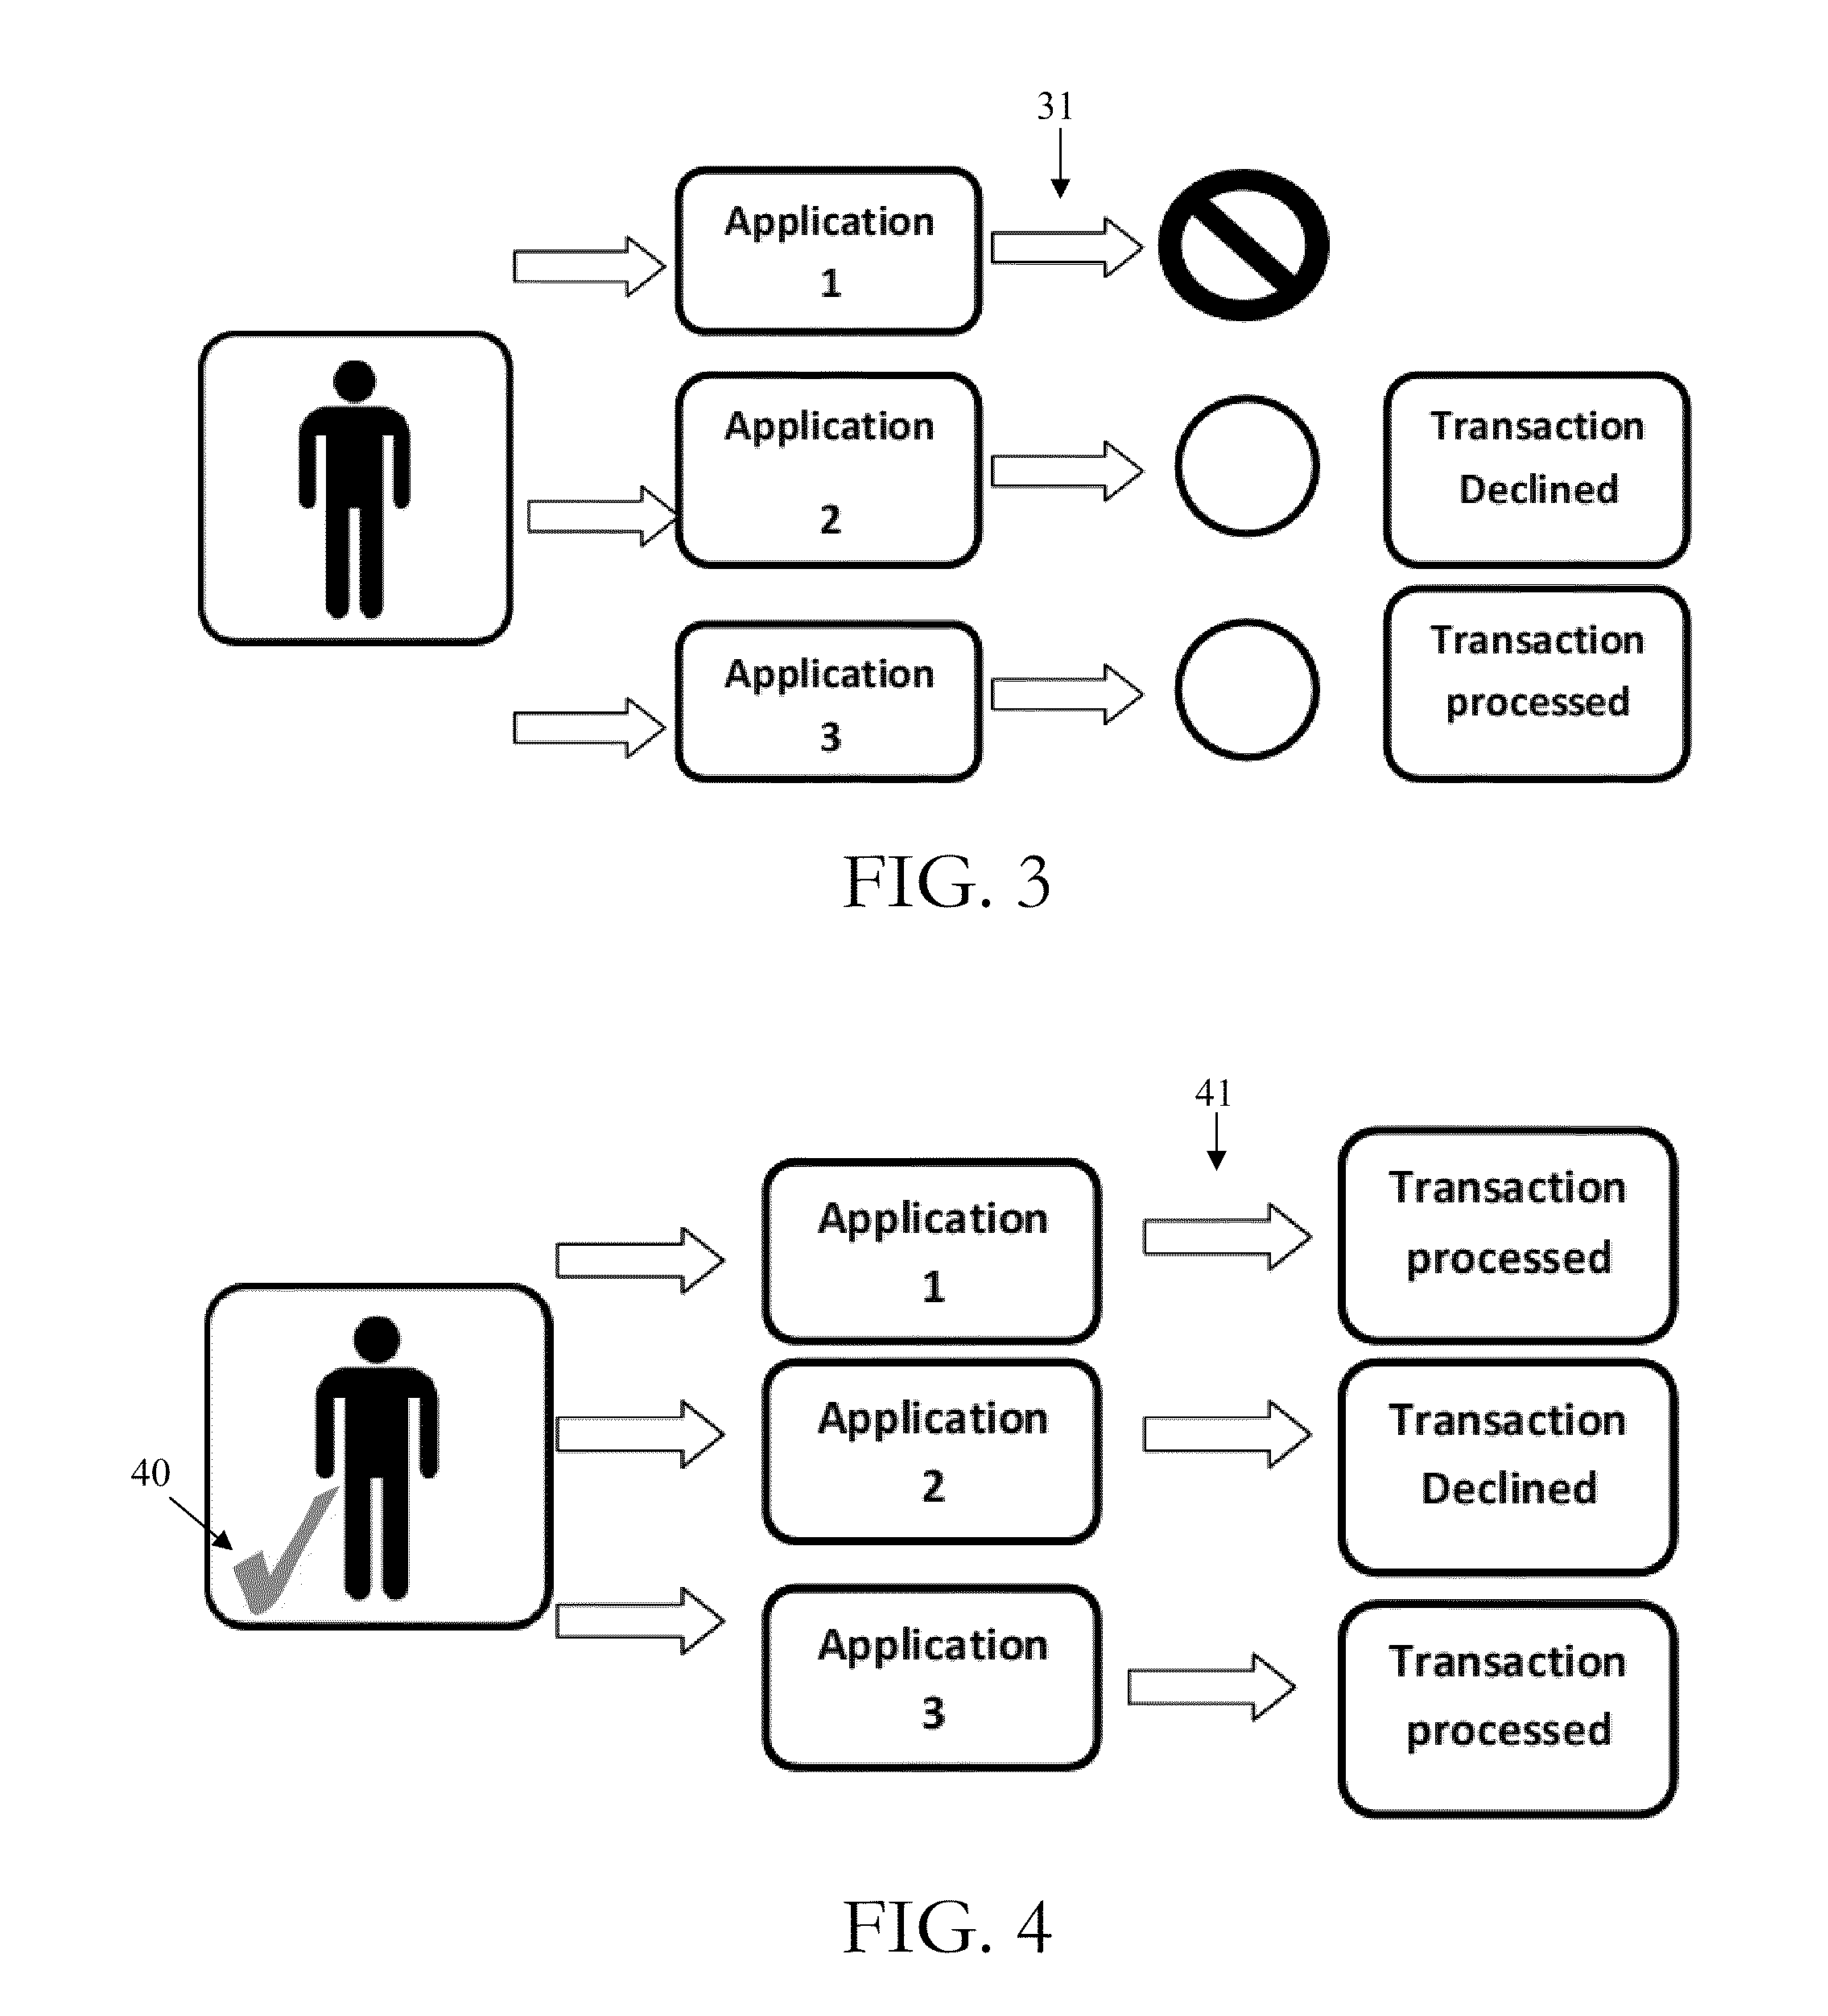 Method of establishing identity validation based on an individual's ability to access multiple secure accounts